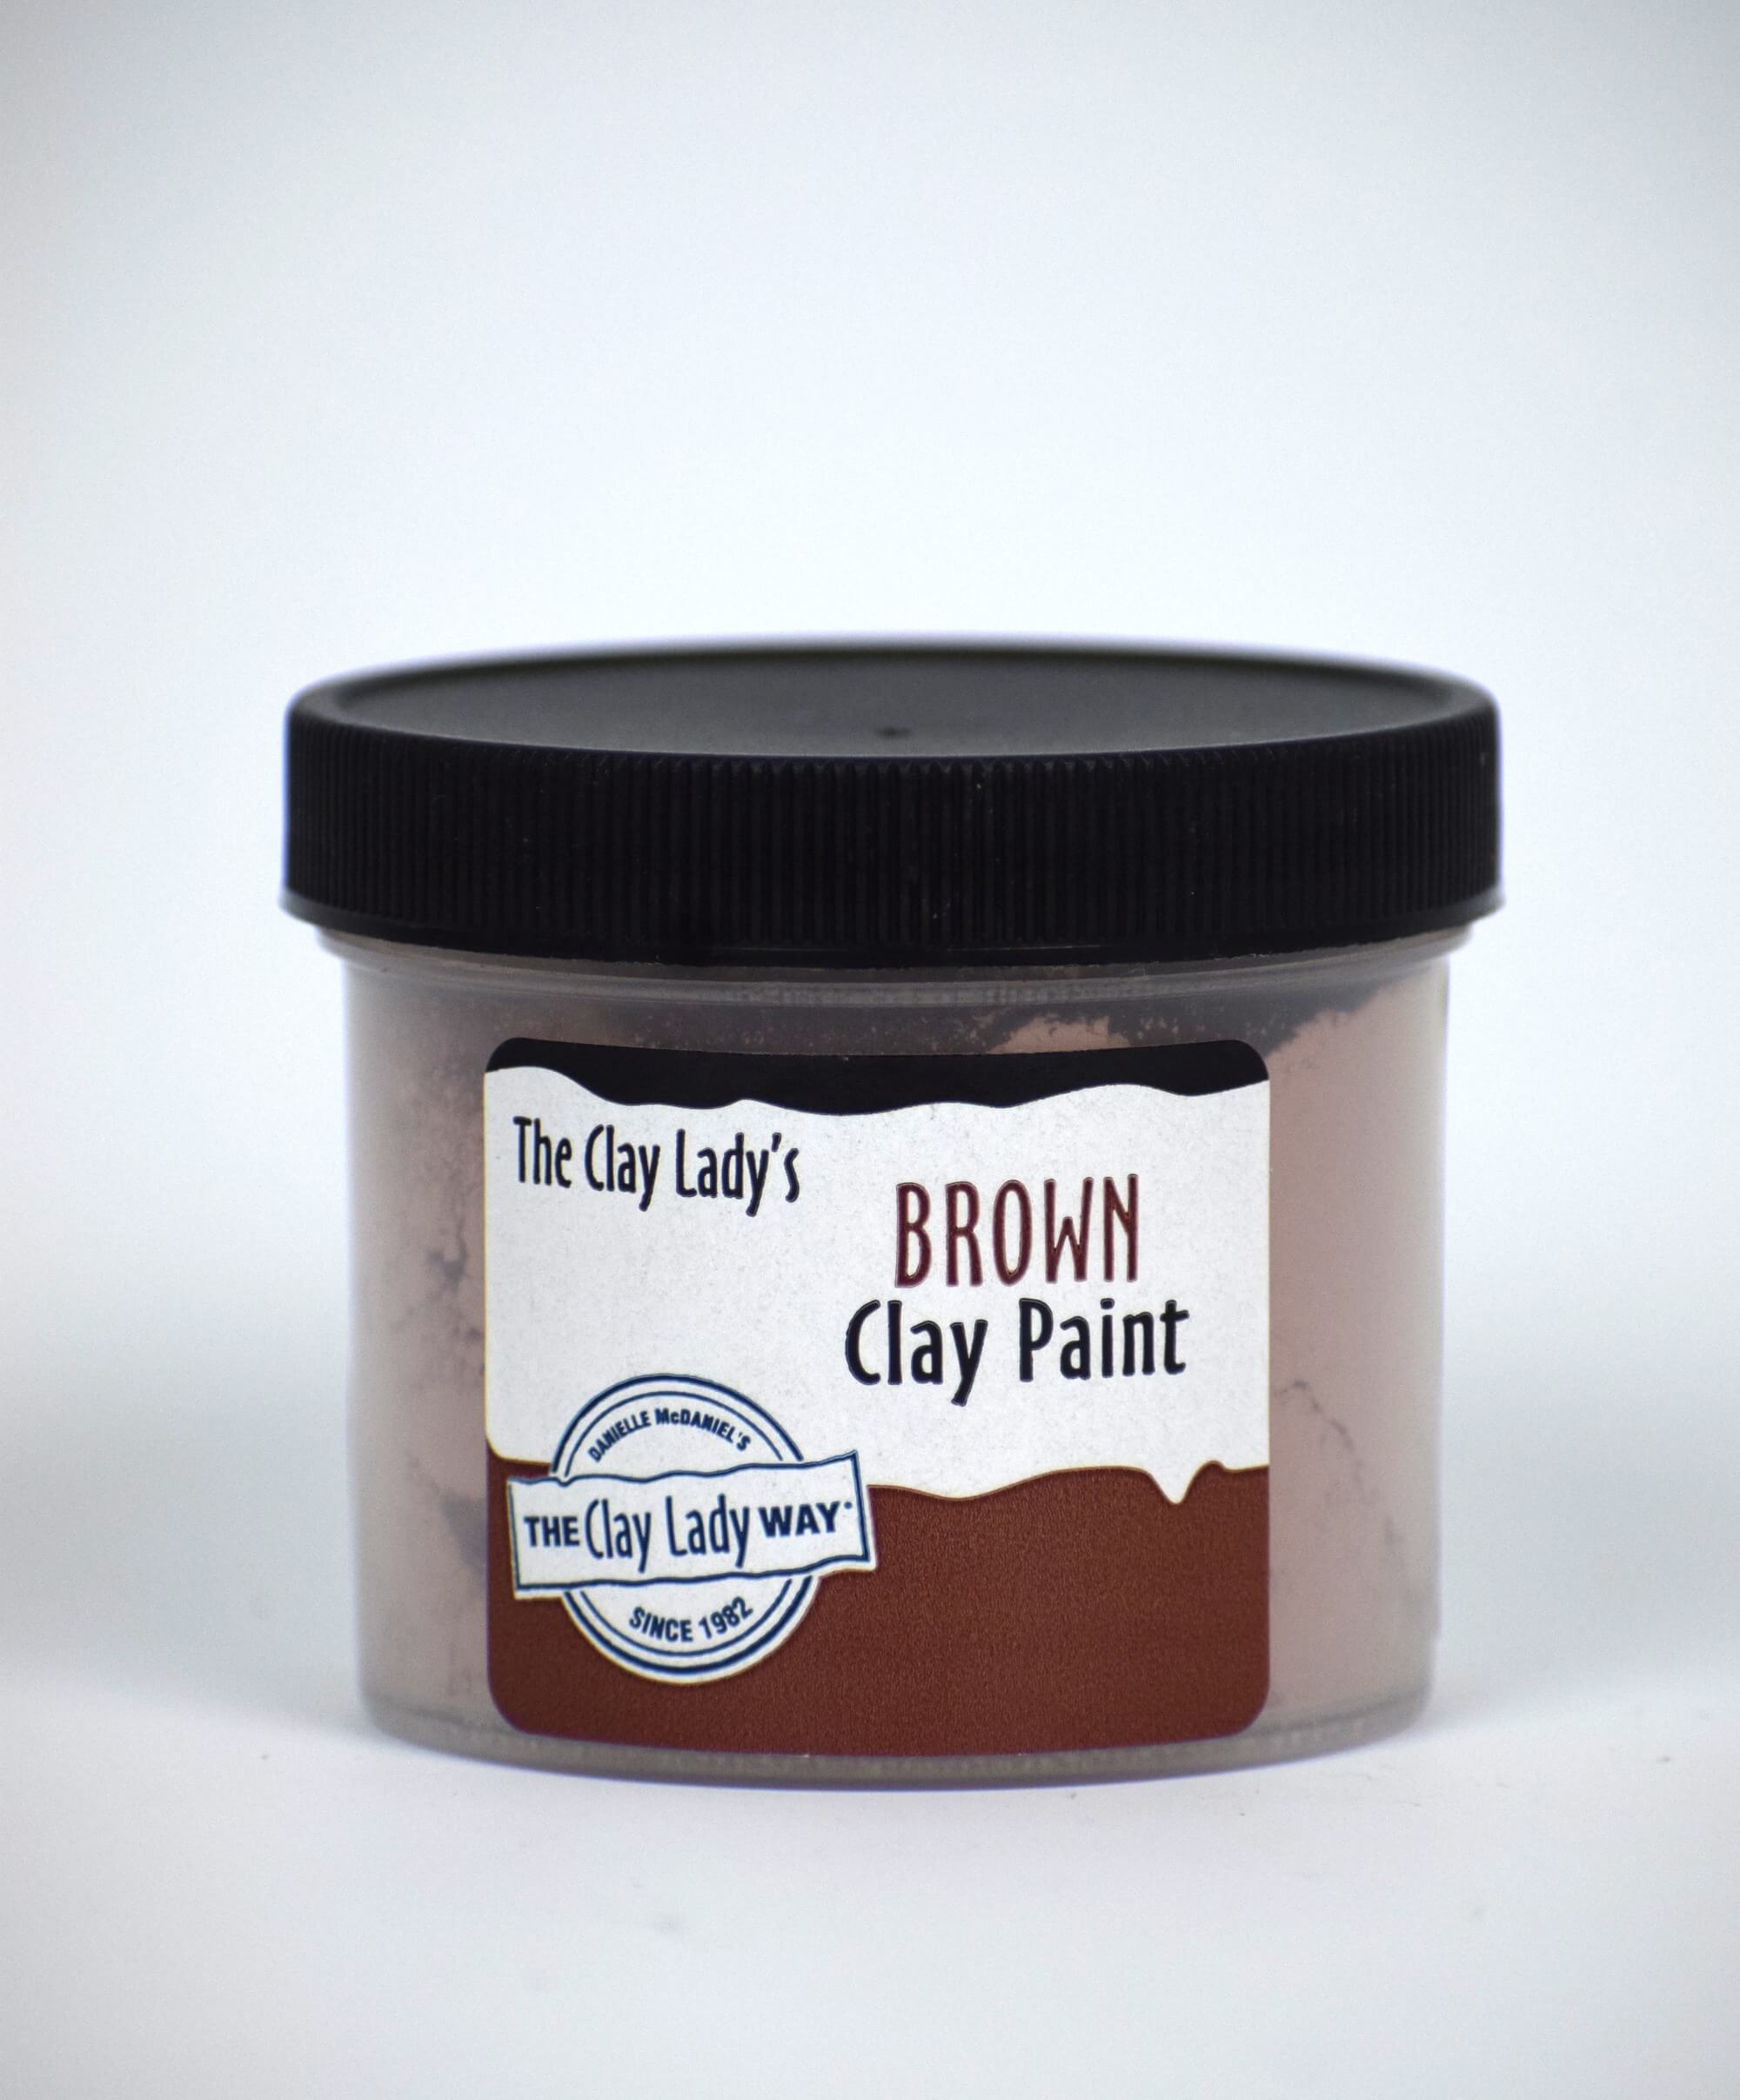 The Clay Lady's Brown Clay Paint - Mid-South Ceramics